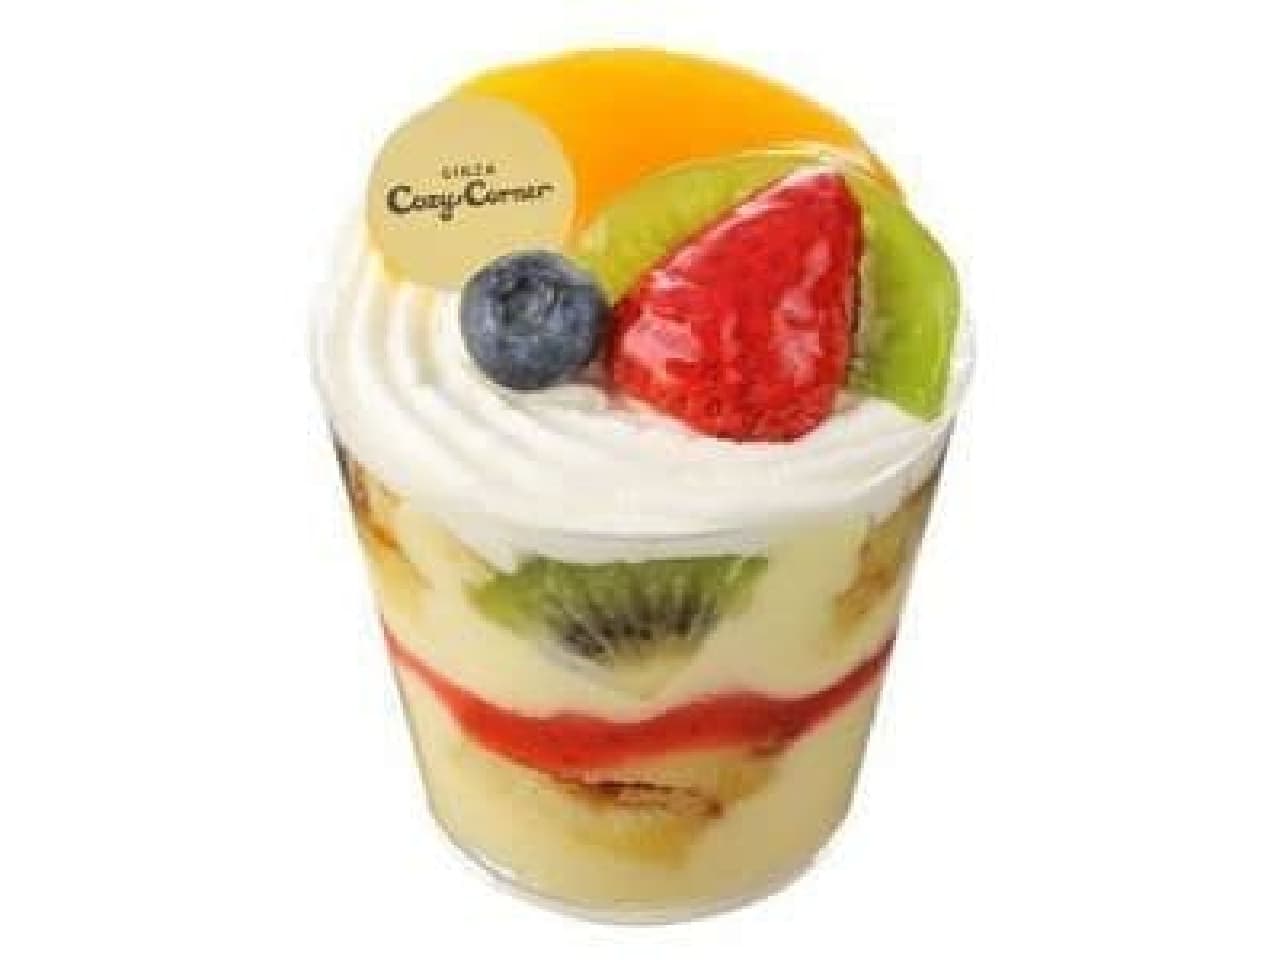 British sweets "Fruit Trifle", which is attracting attention this summer, will be on sale for a limited time from Cozy Corner